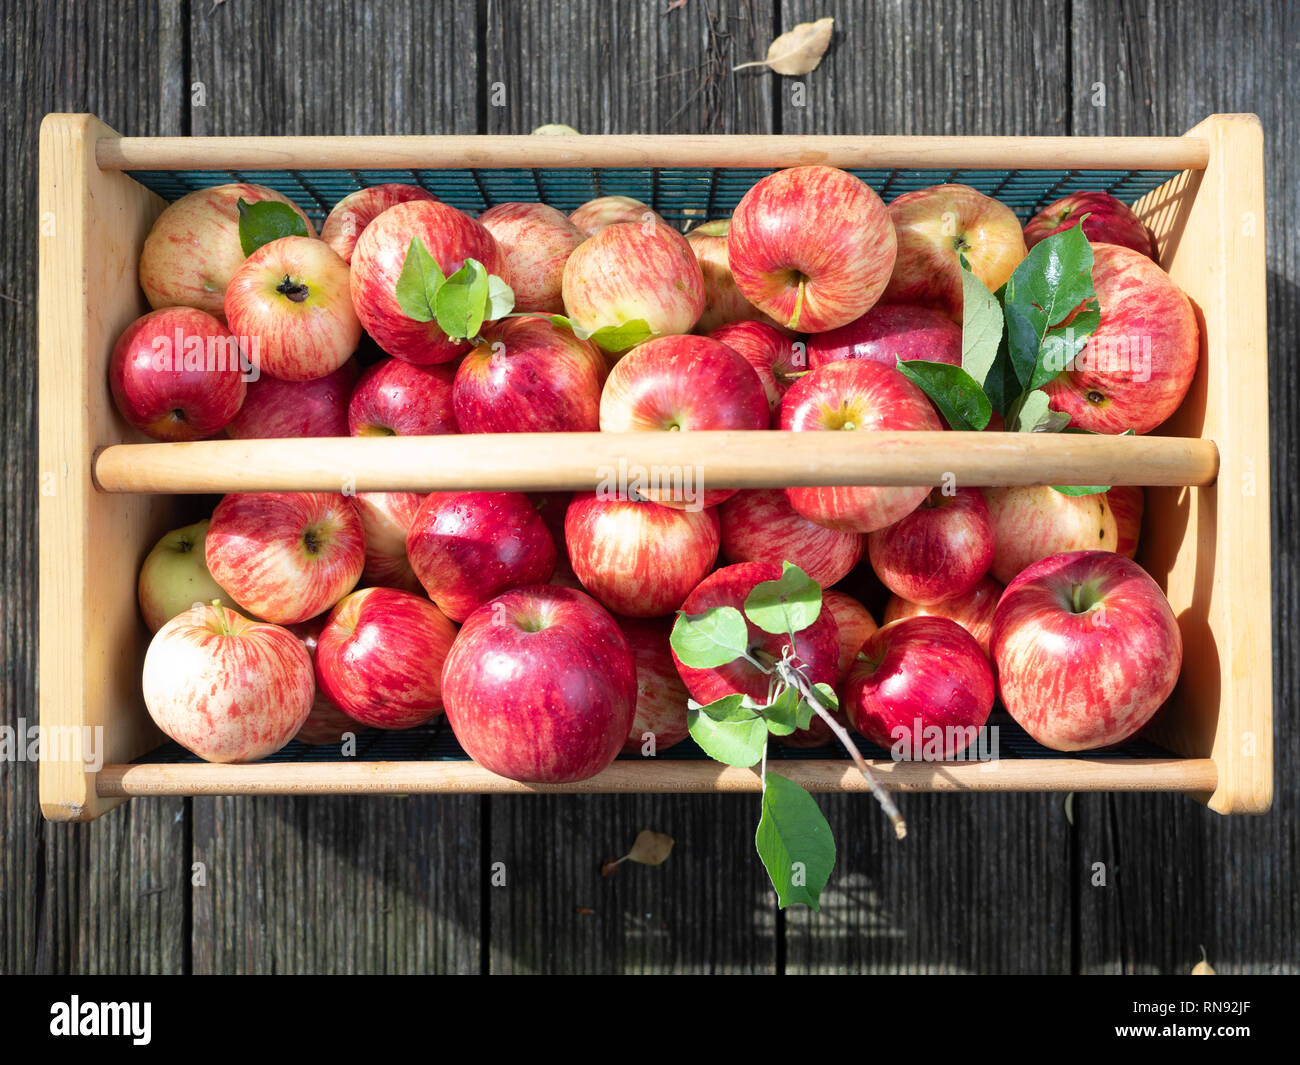 Close up of ripe red apples in a wood and wire basket photographed from above on wood planks. Stock Photo